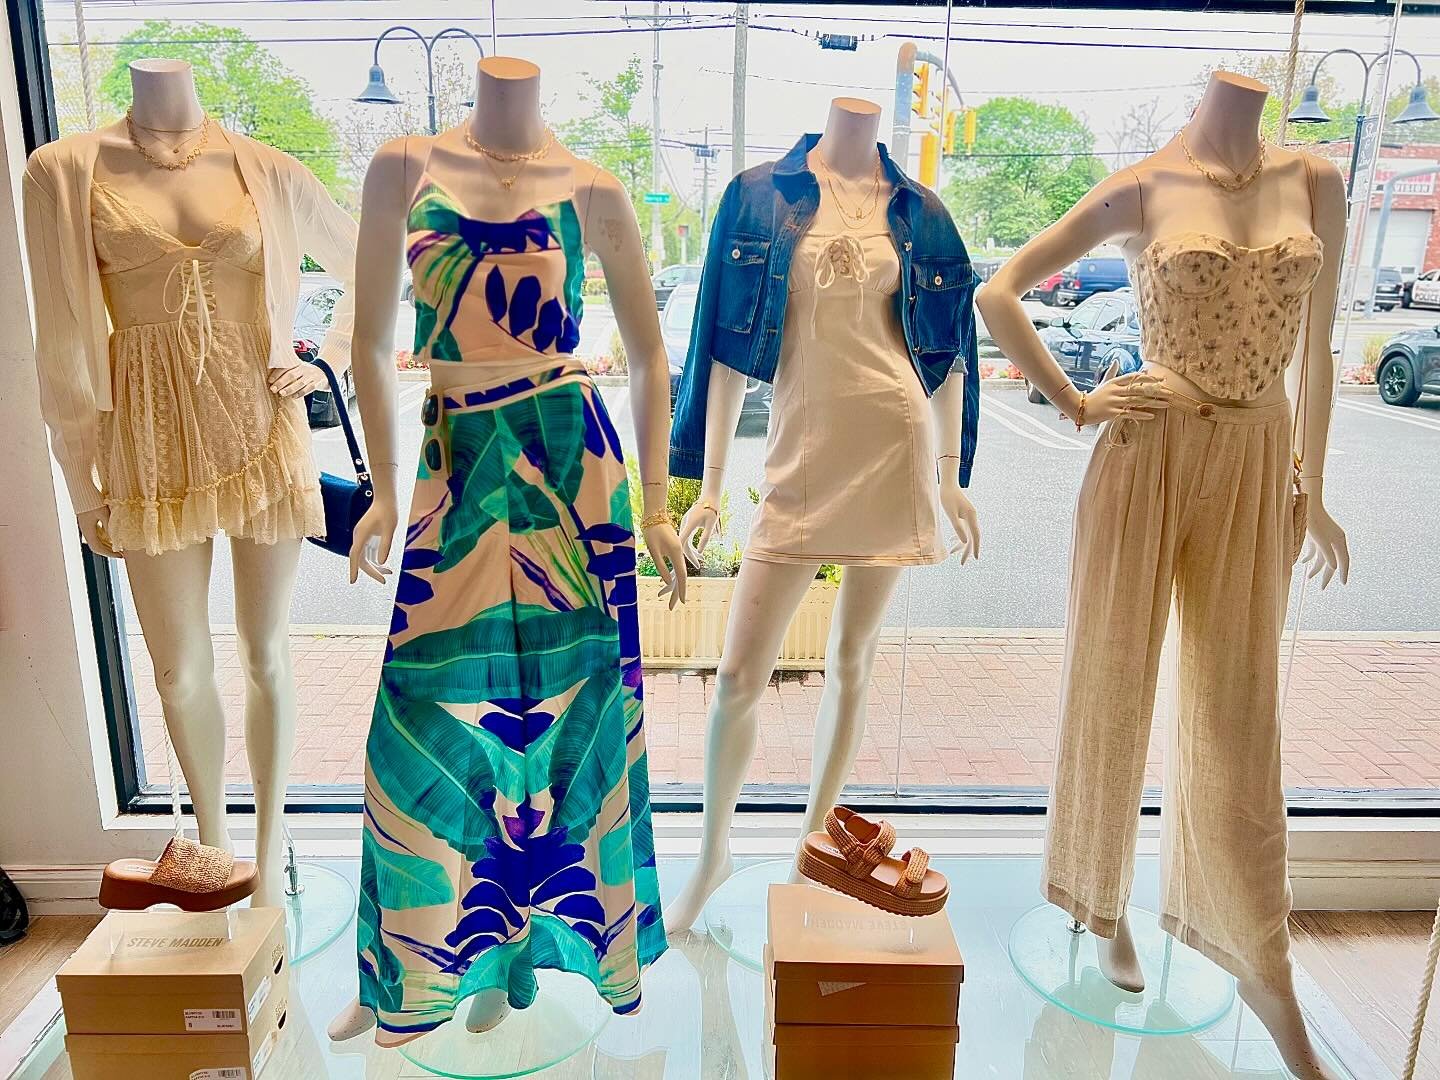 New styles that are waiting for you ✨💙➡️ #vanillaskystores